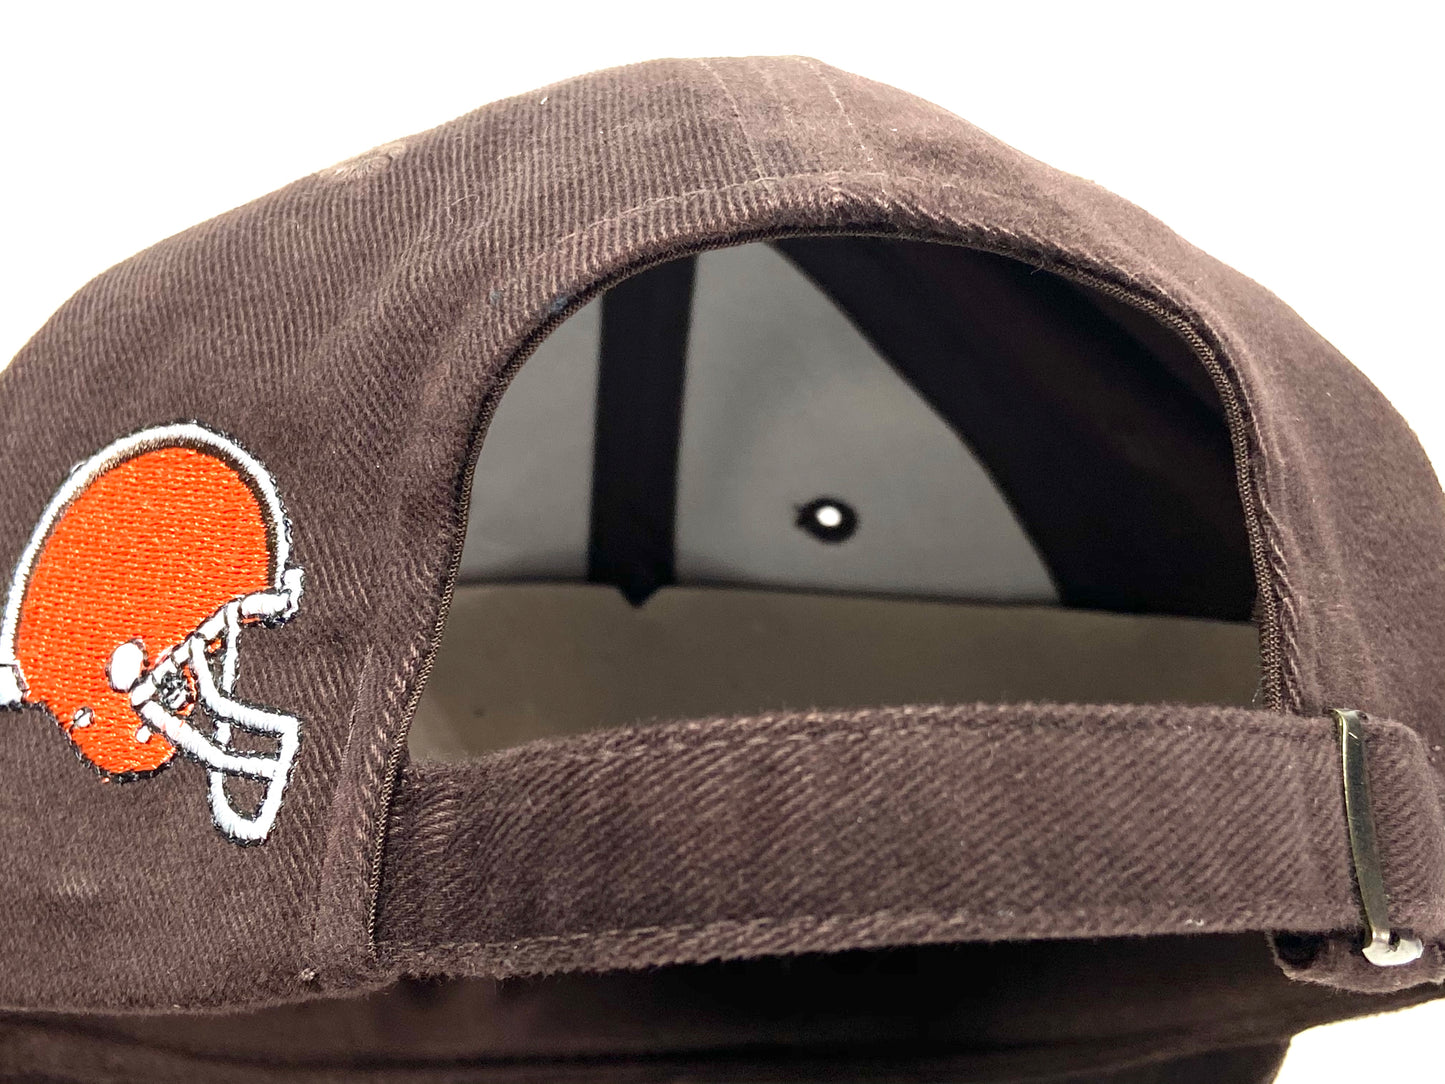 Cleveland Browns Vintage NFL Brown Circle Logo Cap by American Needle